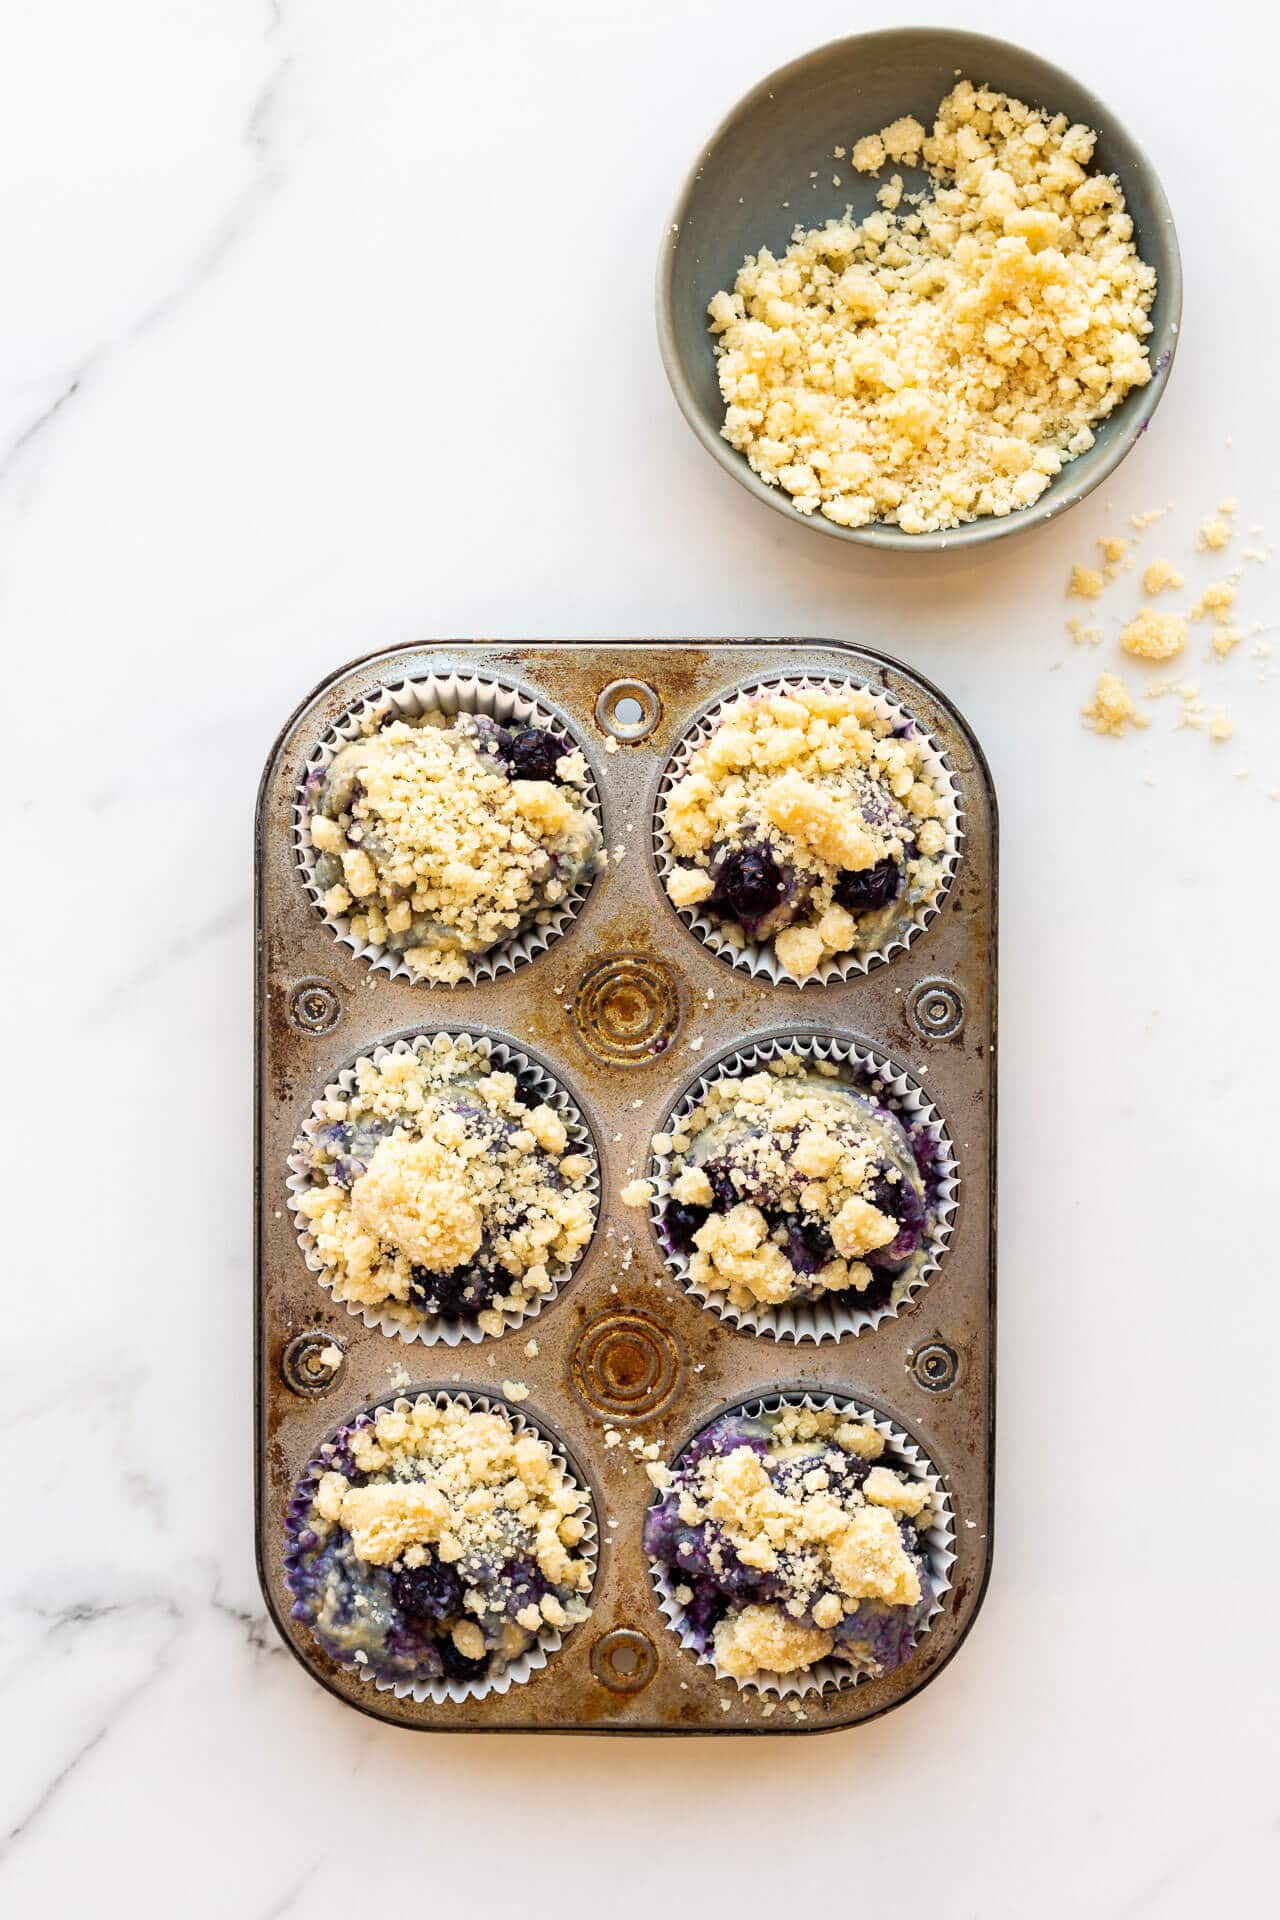 Topping blueberry muffins with streusel topping in a vintage muffin pan before baking